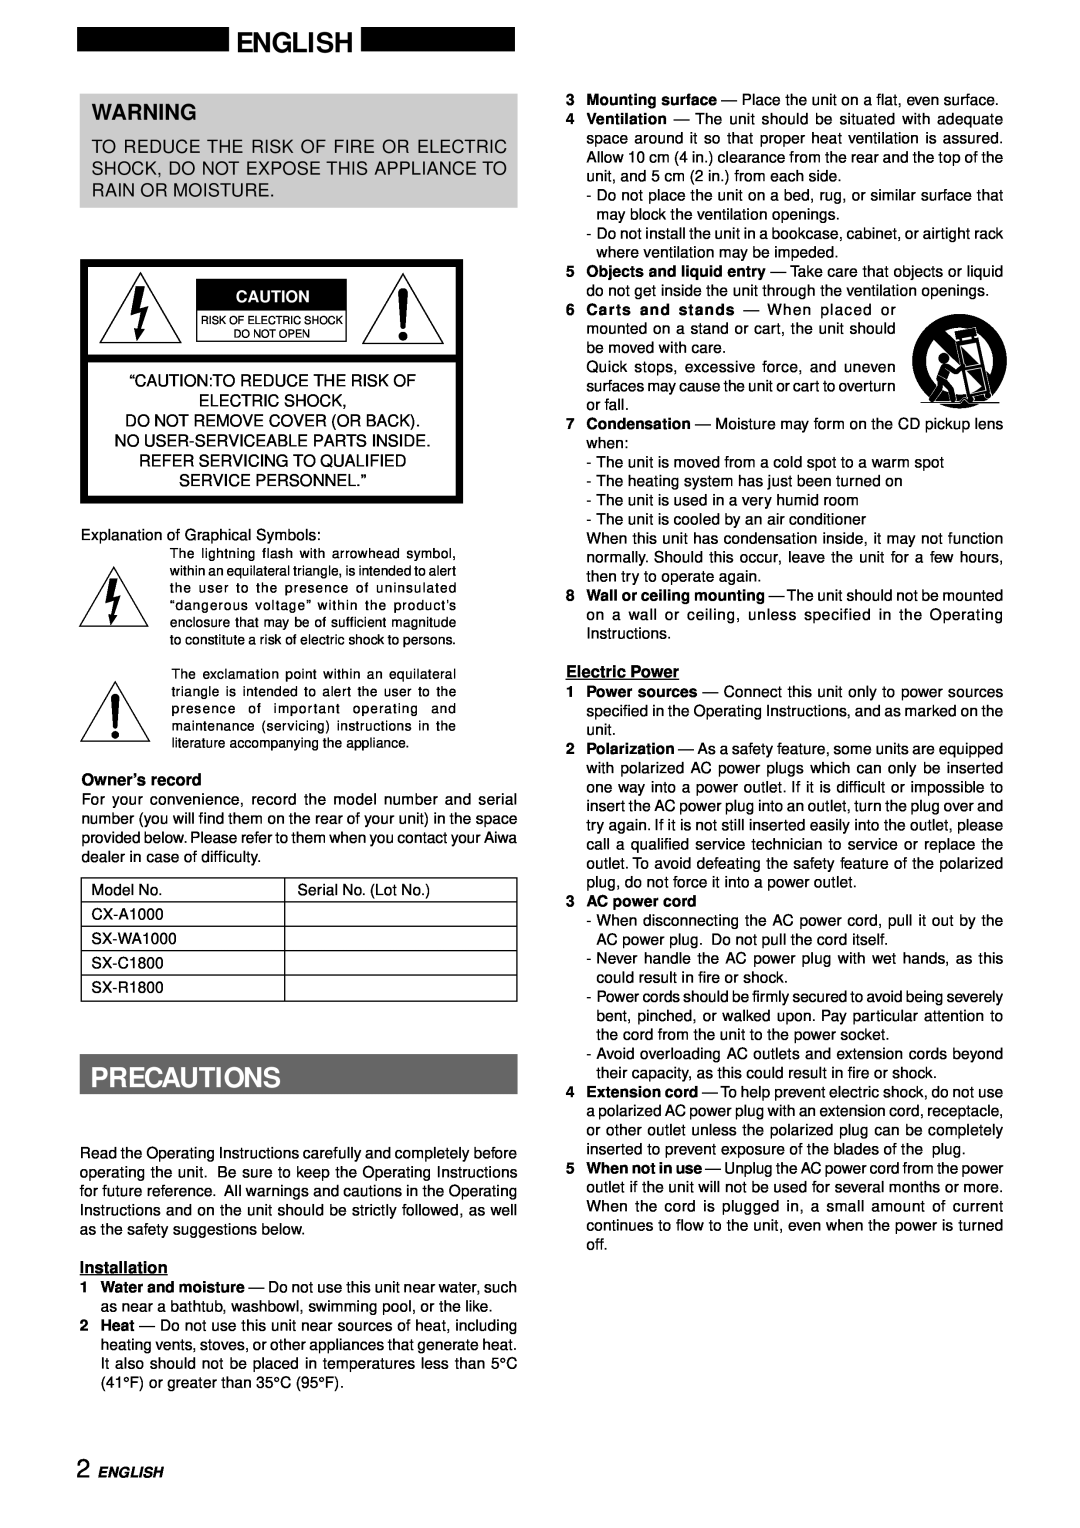 Aiwa XH-A1000 manual English, Precautions, “Caution:To Reduce The Risk Of, Electric Shock, Do Not Remove Cover Or Back 